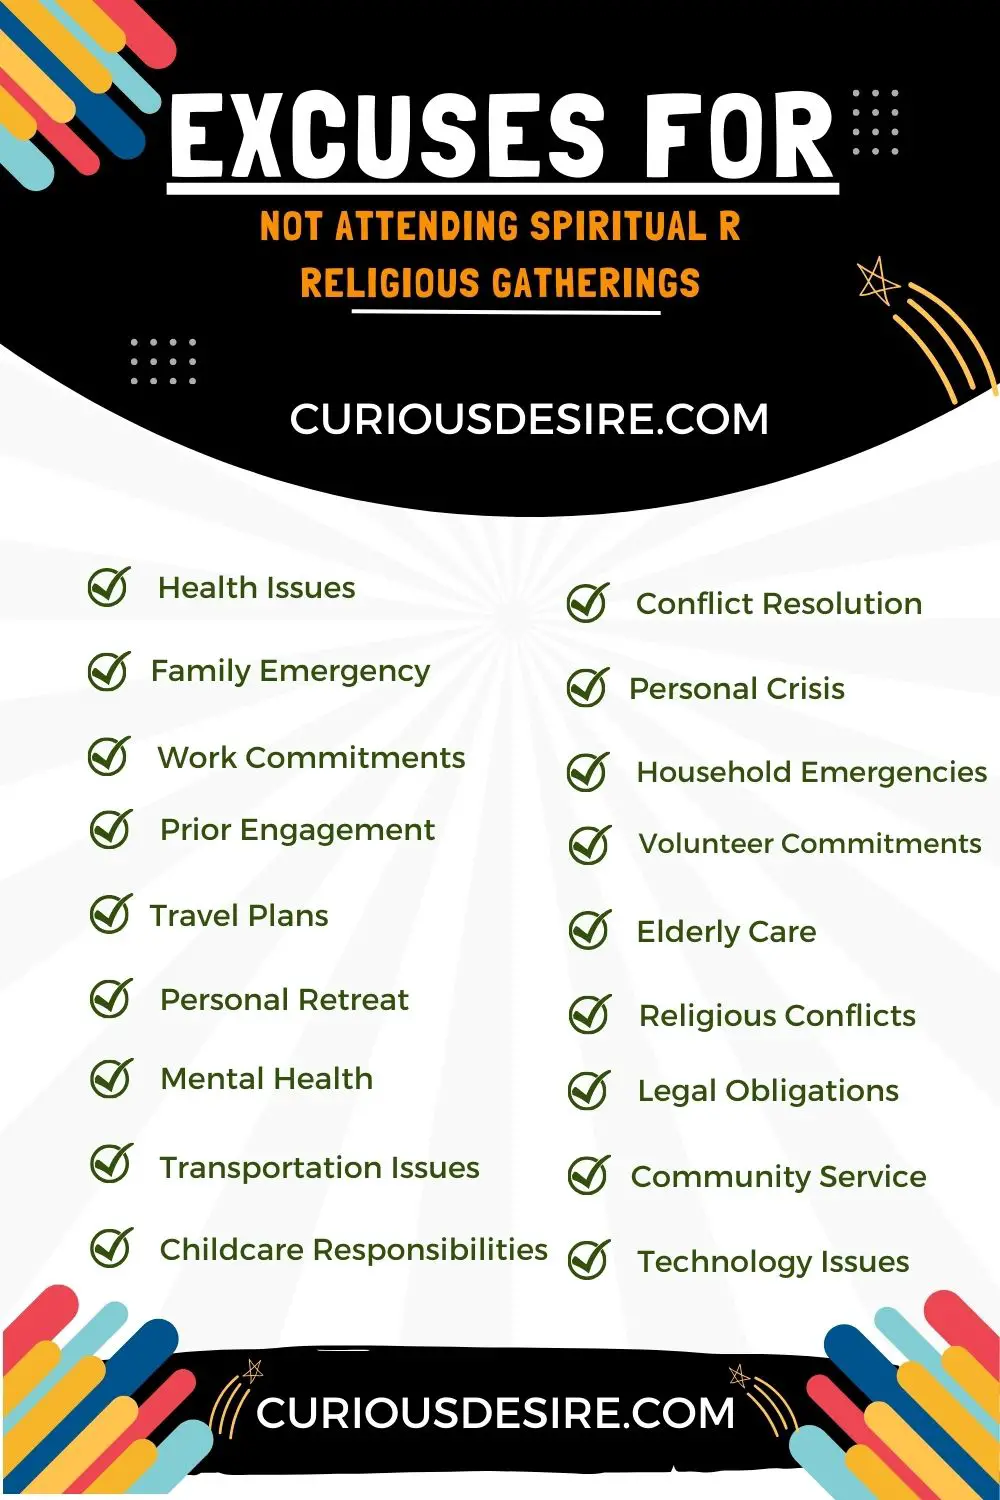 Excuses for not Attending Spiritual Religious Gatherings